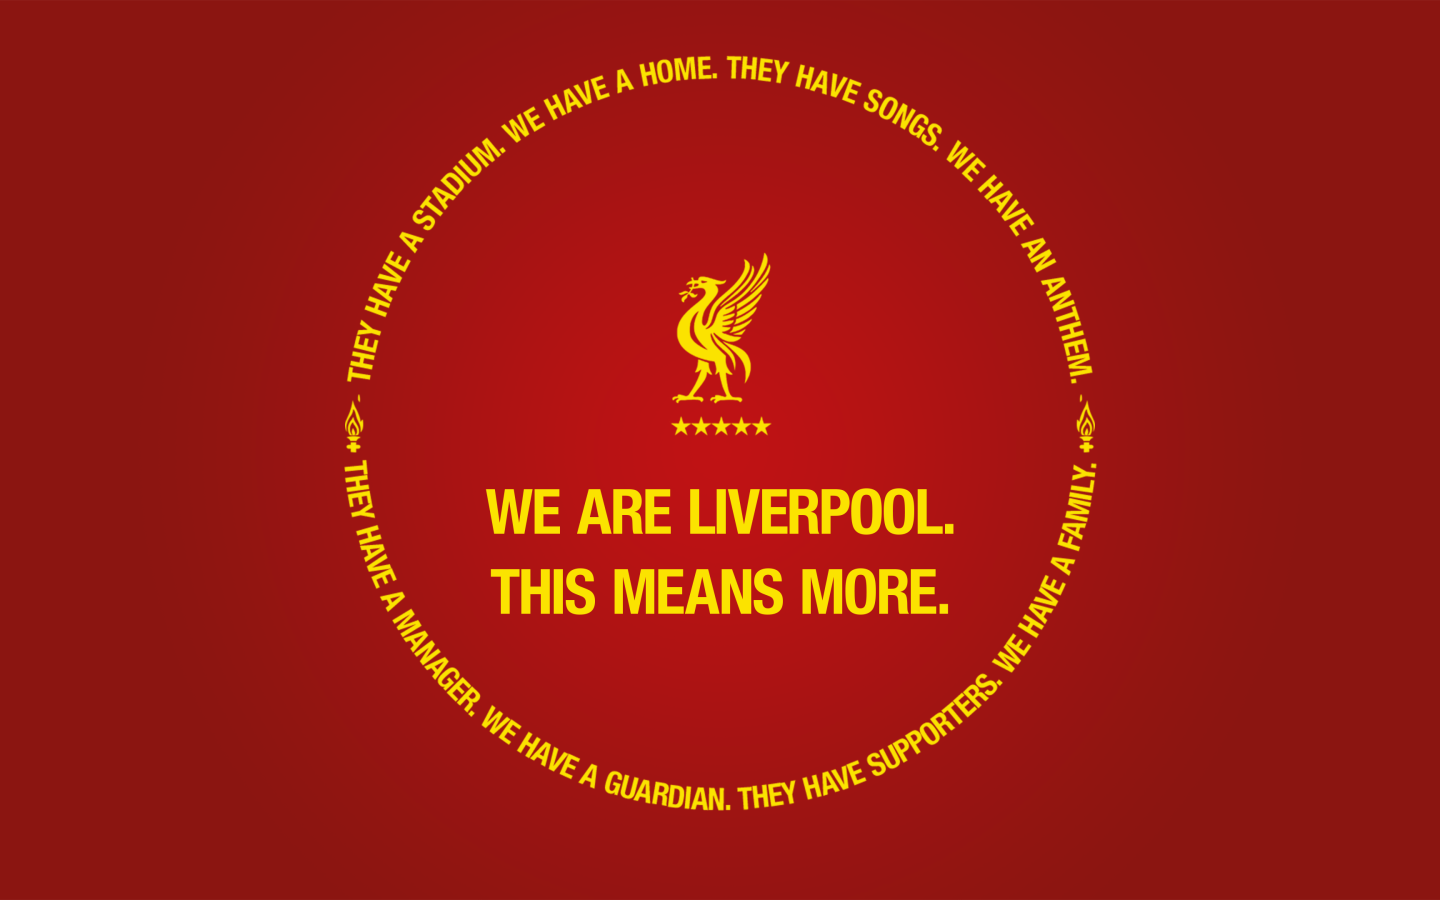 Logo of football club Liverpool on a red background